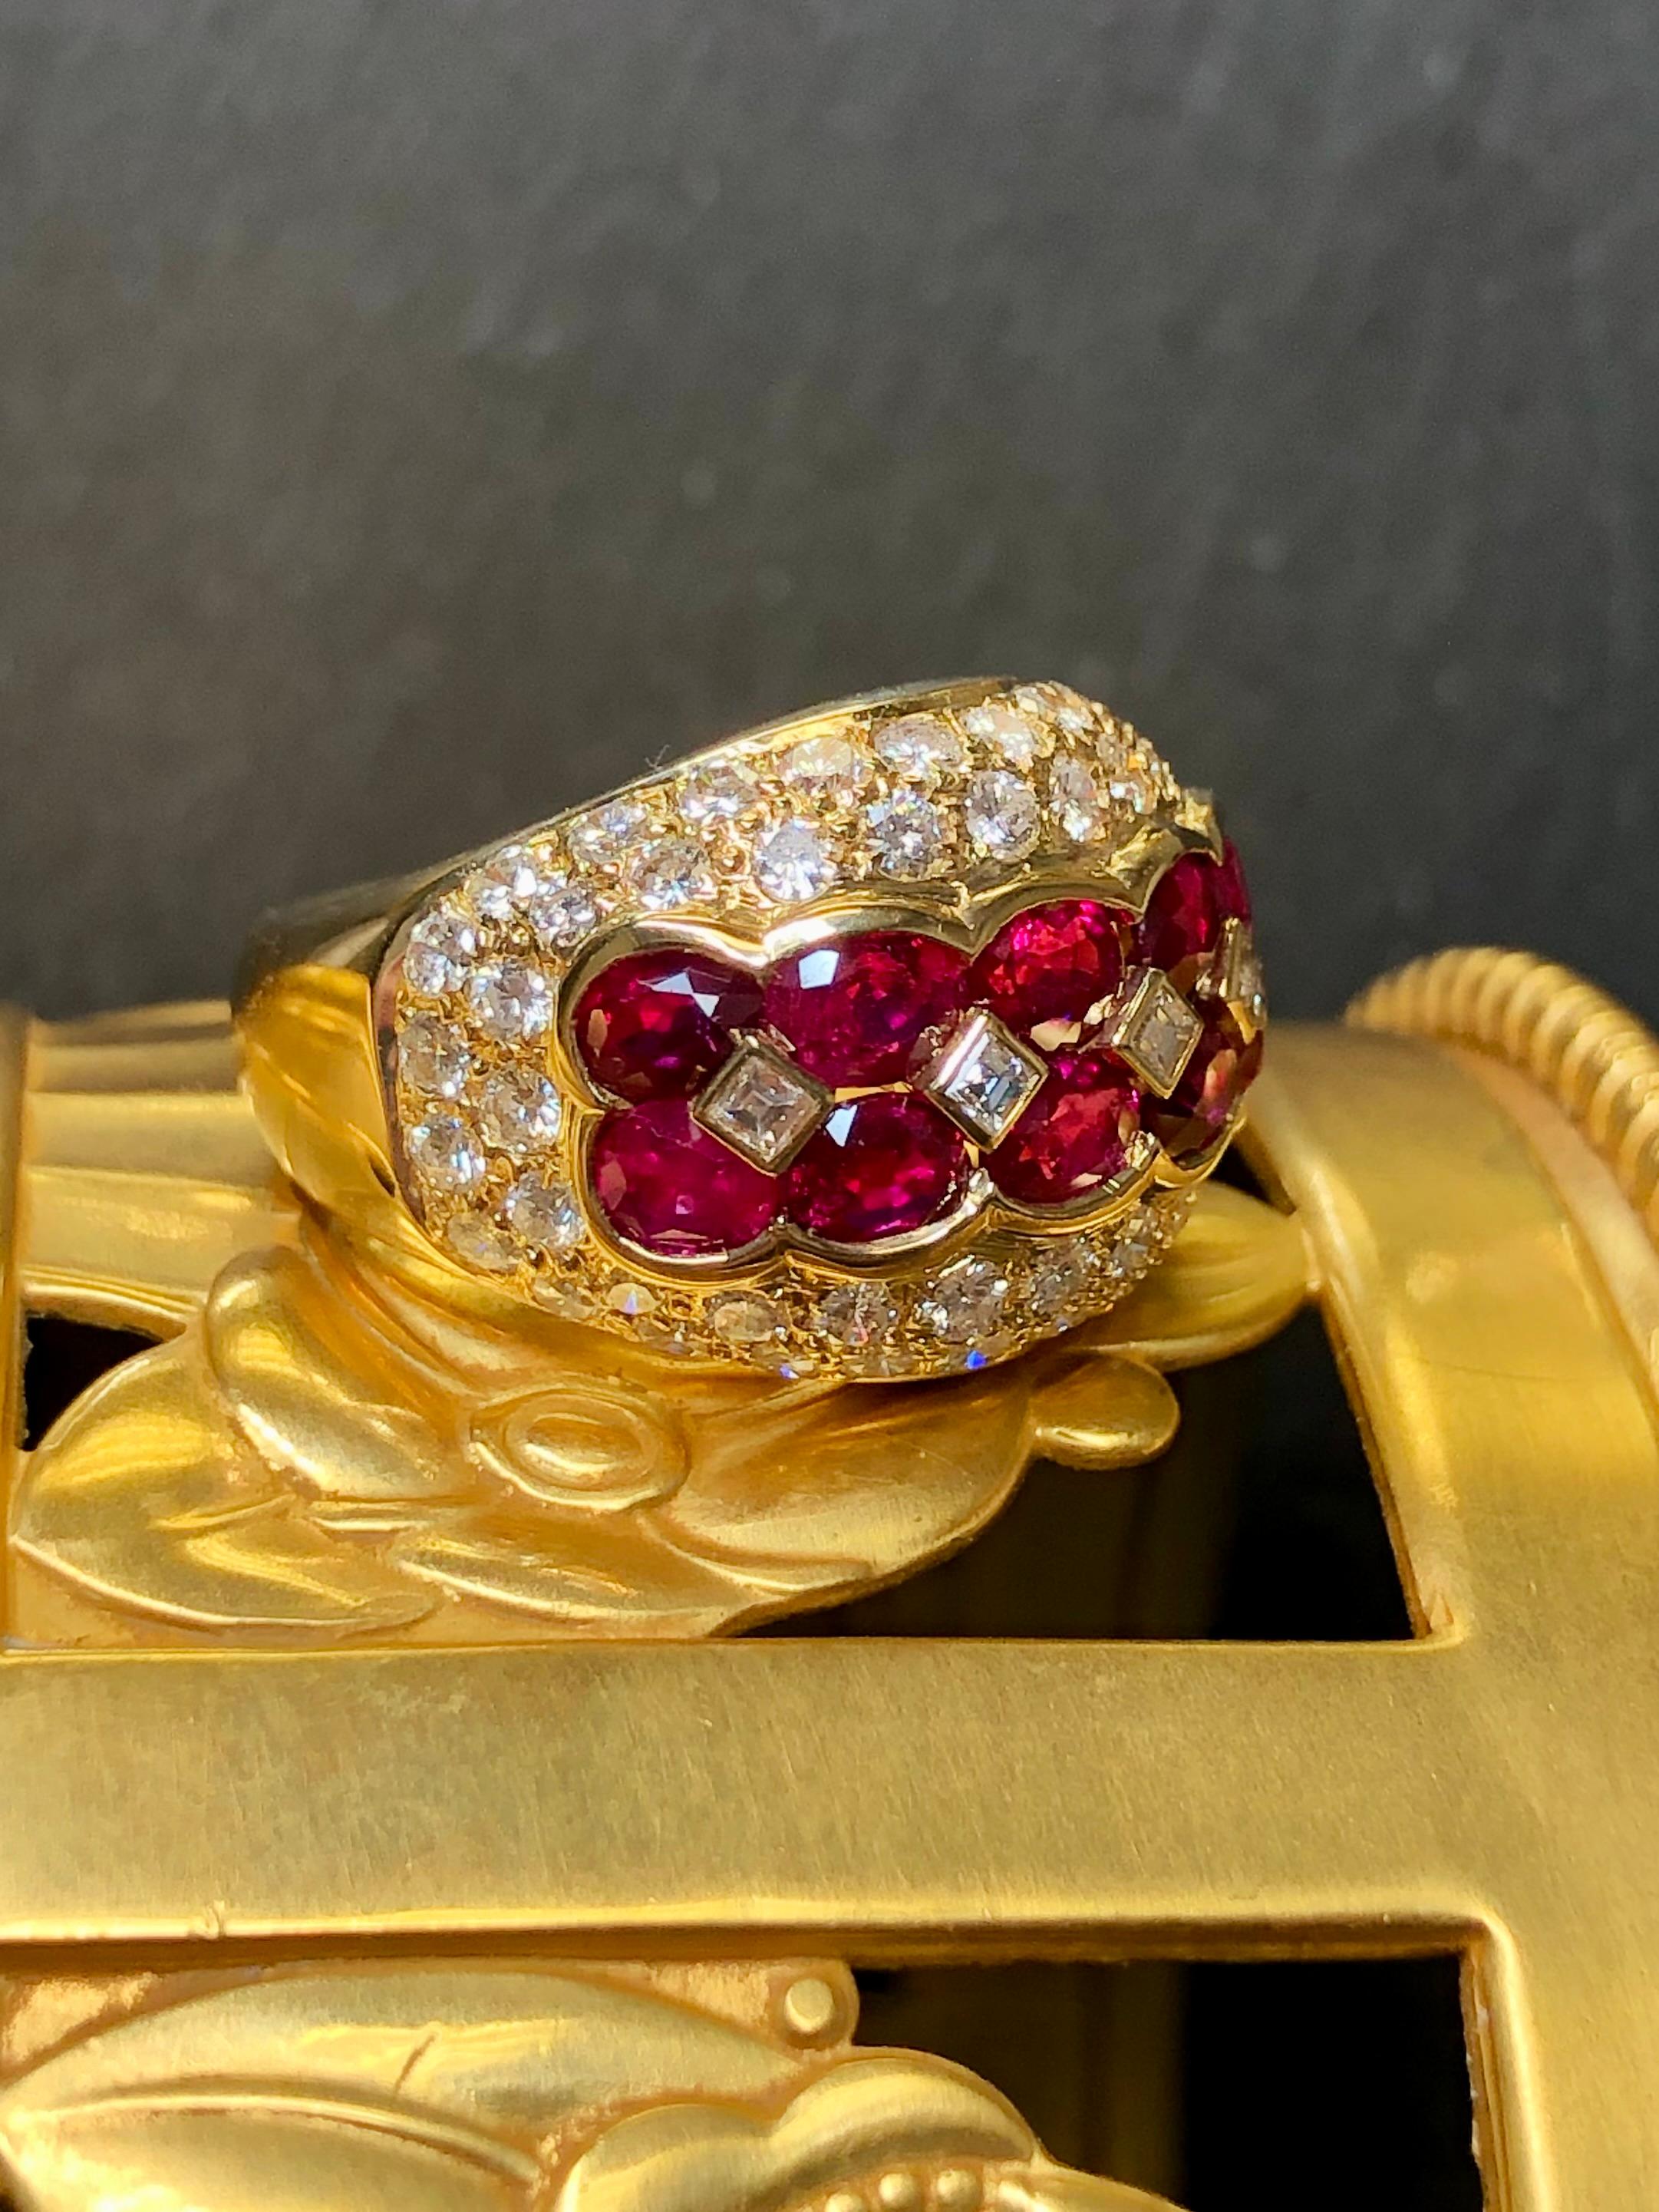 Contemporary Estate 18K Yellow Gold Oval Ruby Pave Diamond Cocktail Ring 4.57cttw Sz 5.5 For Sale